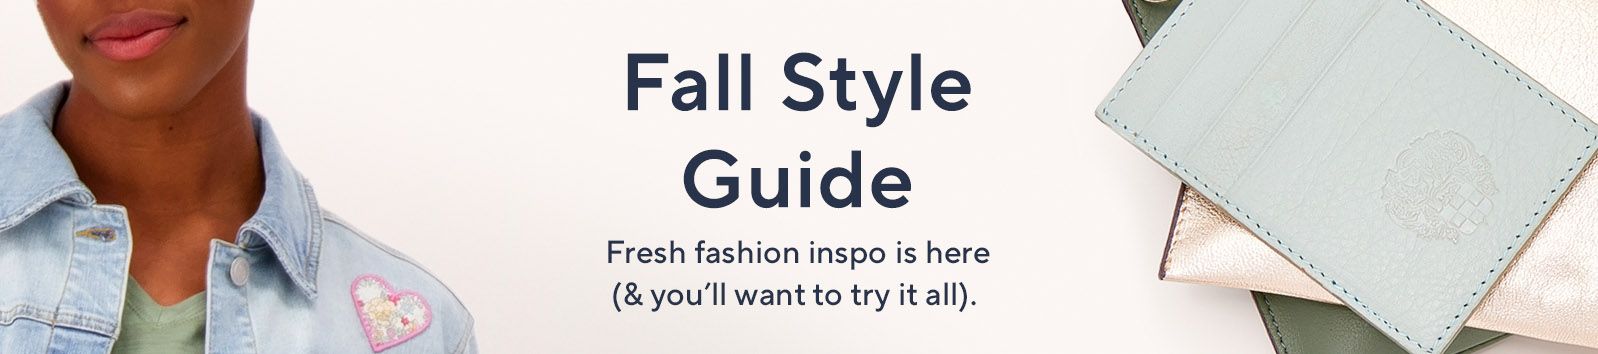 Fall Style Guide:  Fresh fashion inspo is here (& you'll want to try it all). 